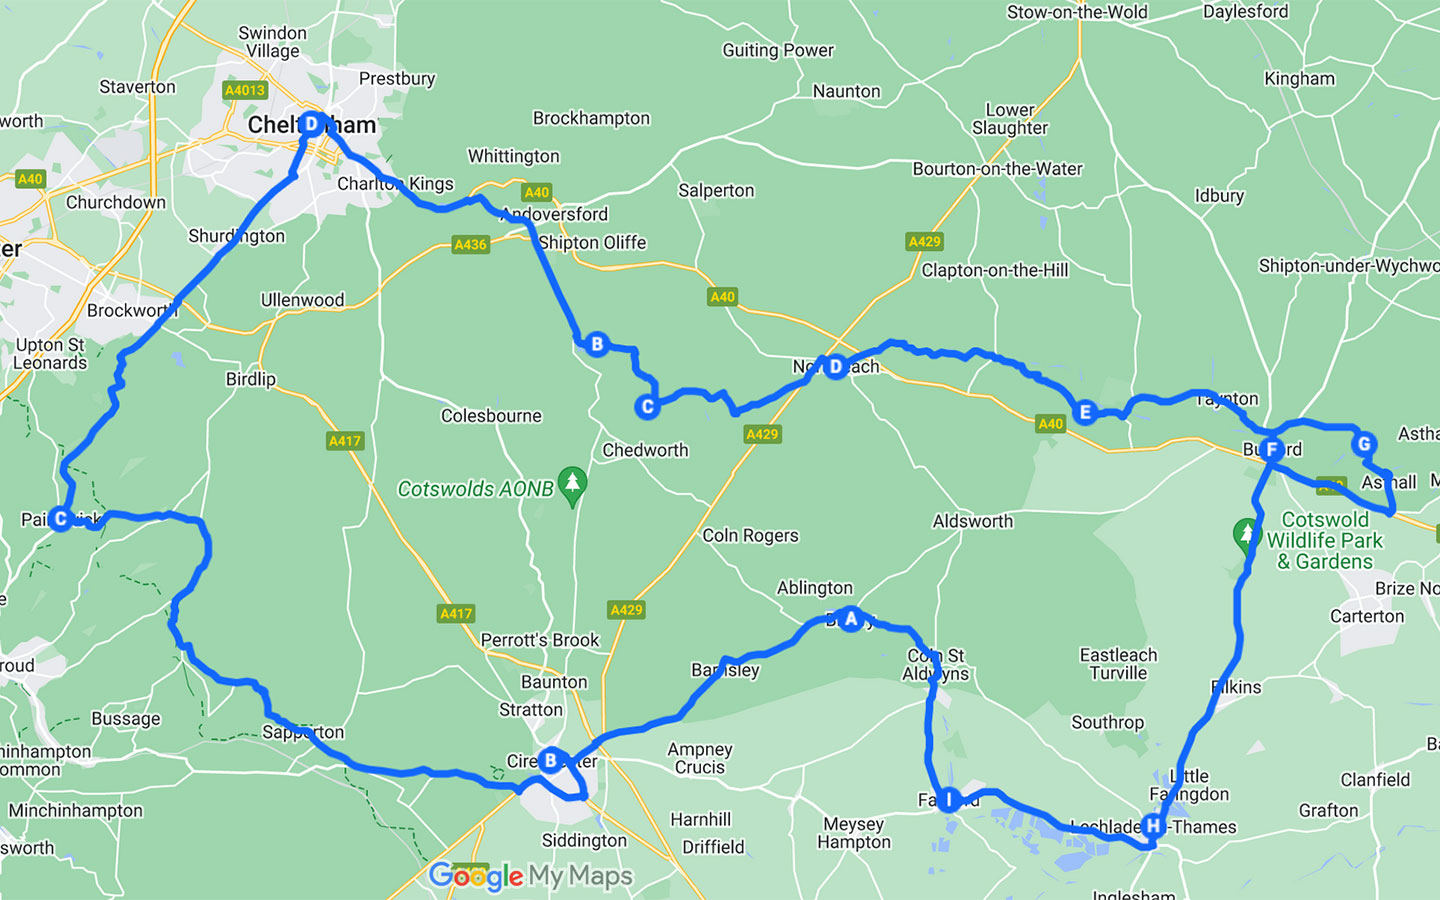 Cotswolds Romantic Road day 2 map of the route